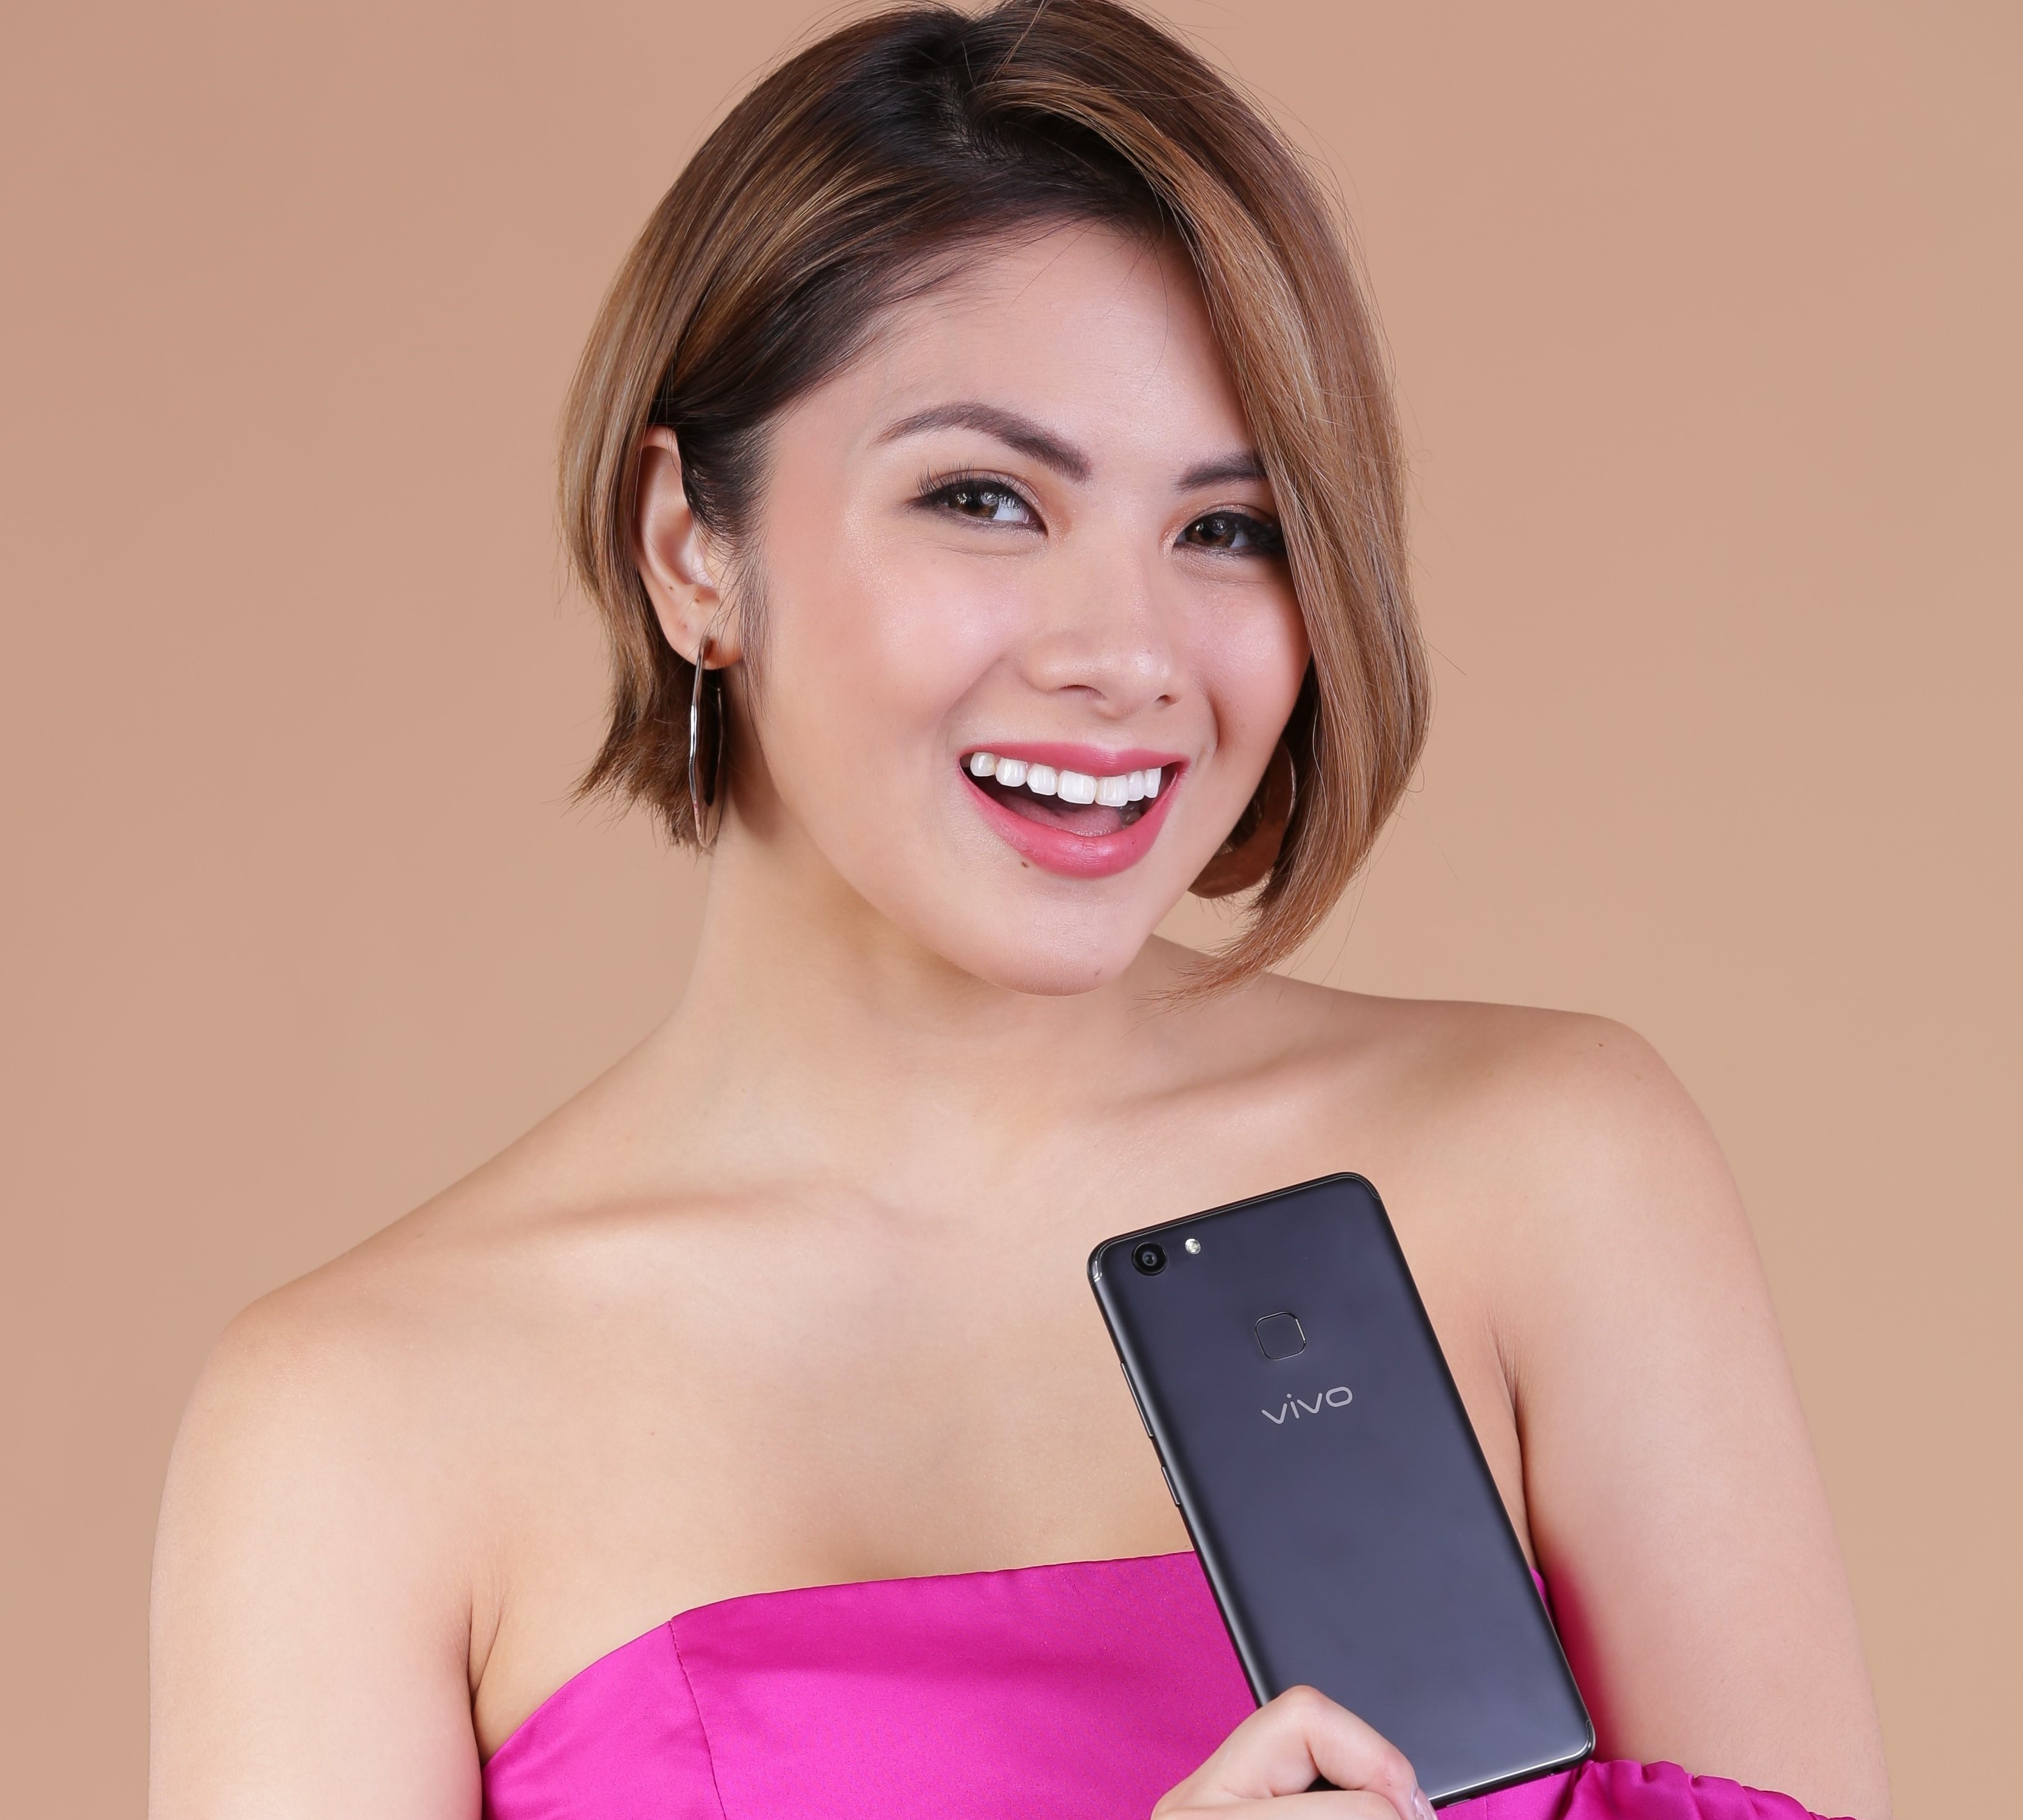 Celebrity blogger and DJ Ashley Rivera is thrilled with her Vivo endorsement